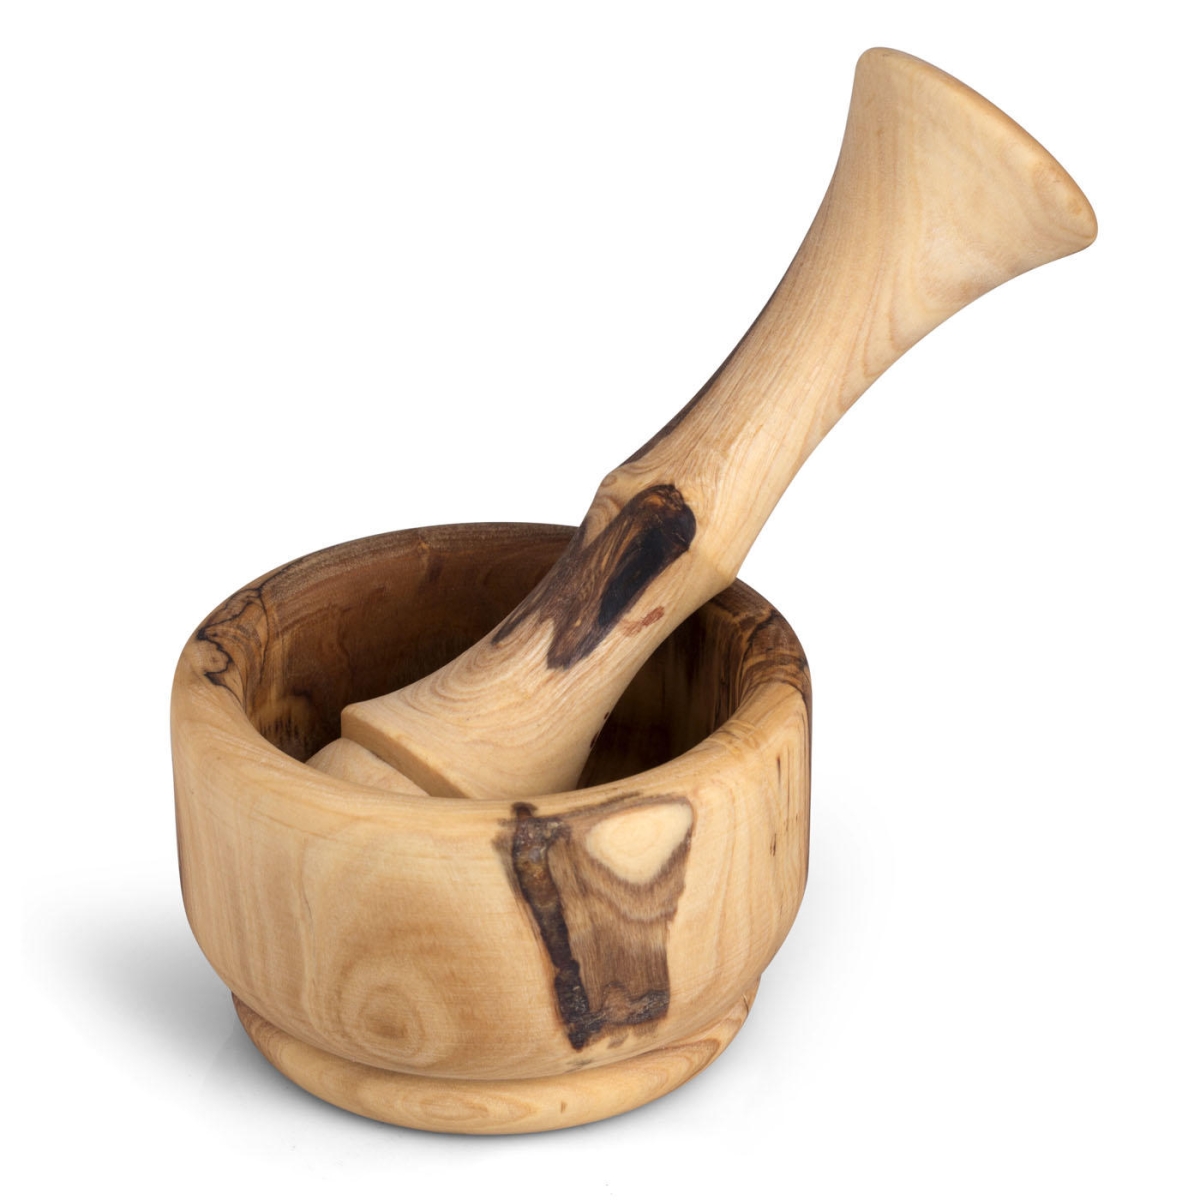 Olive Wood Pestle and Mortar - 1